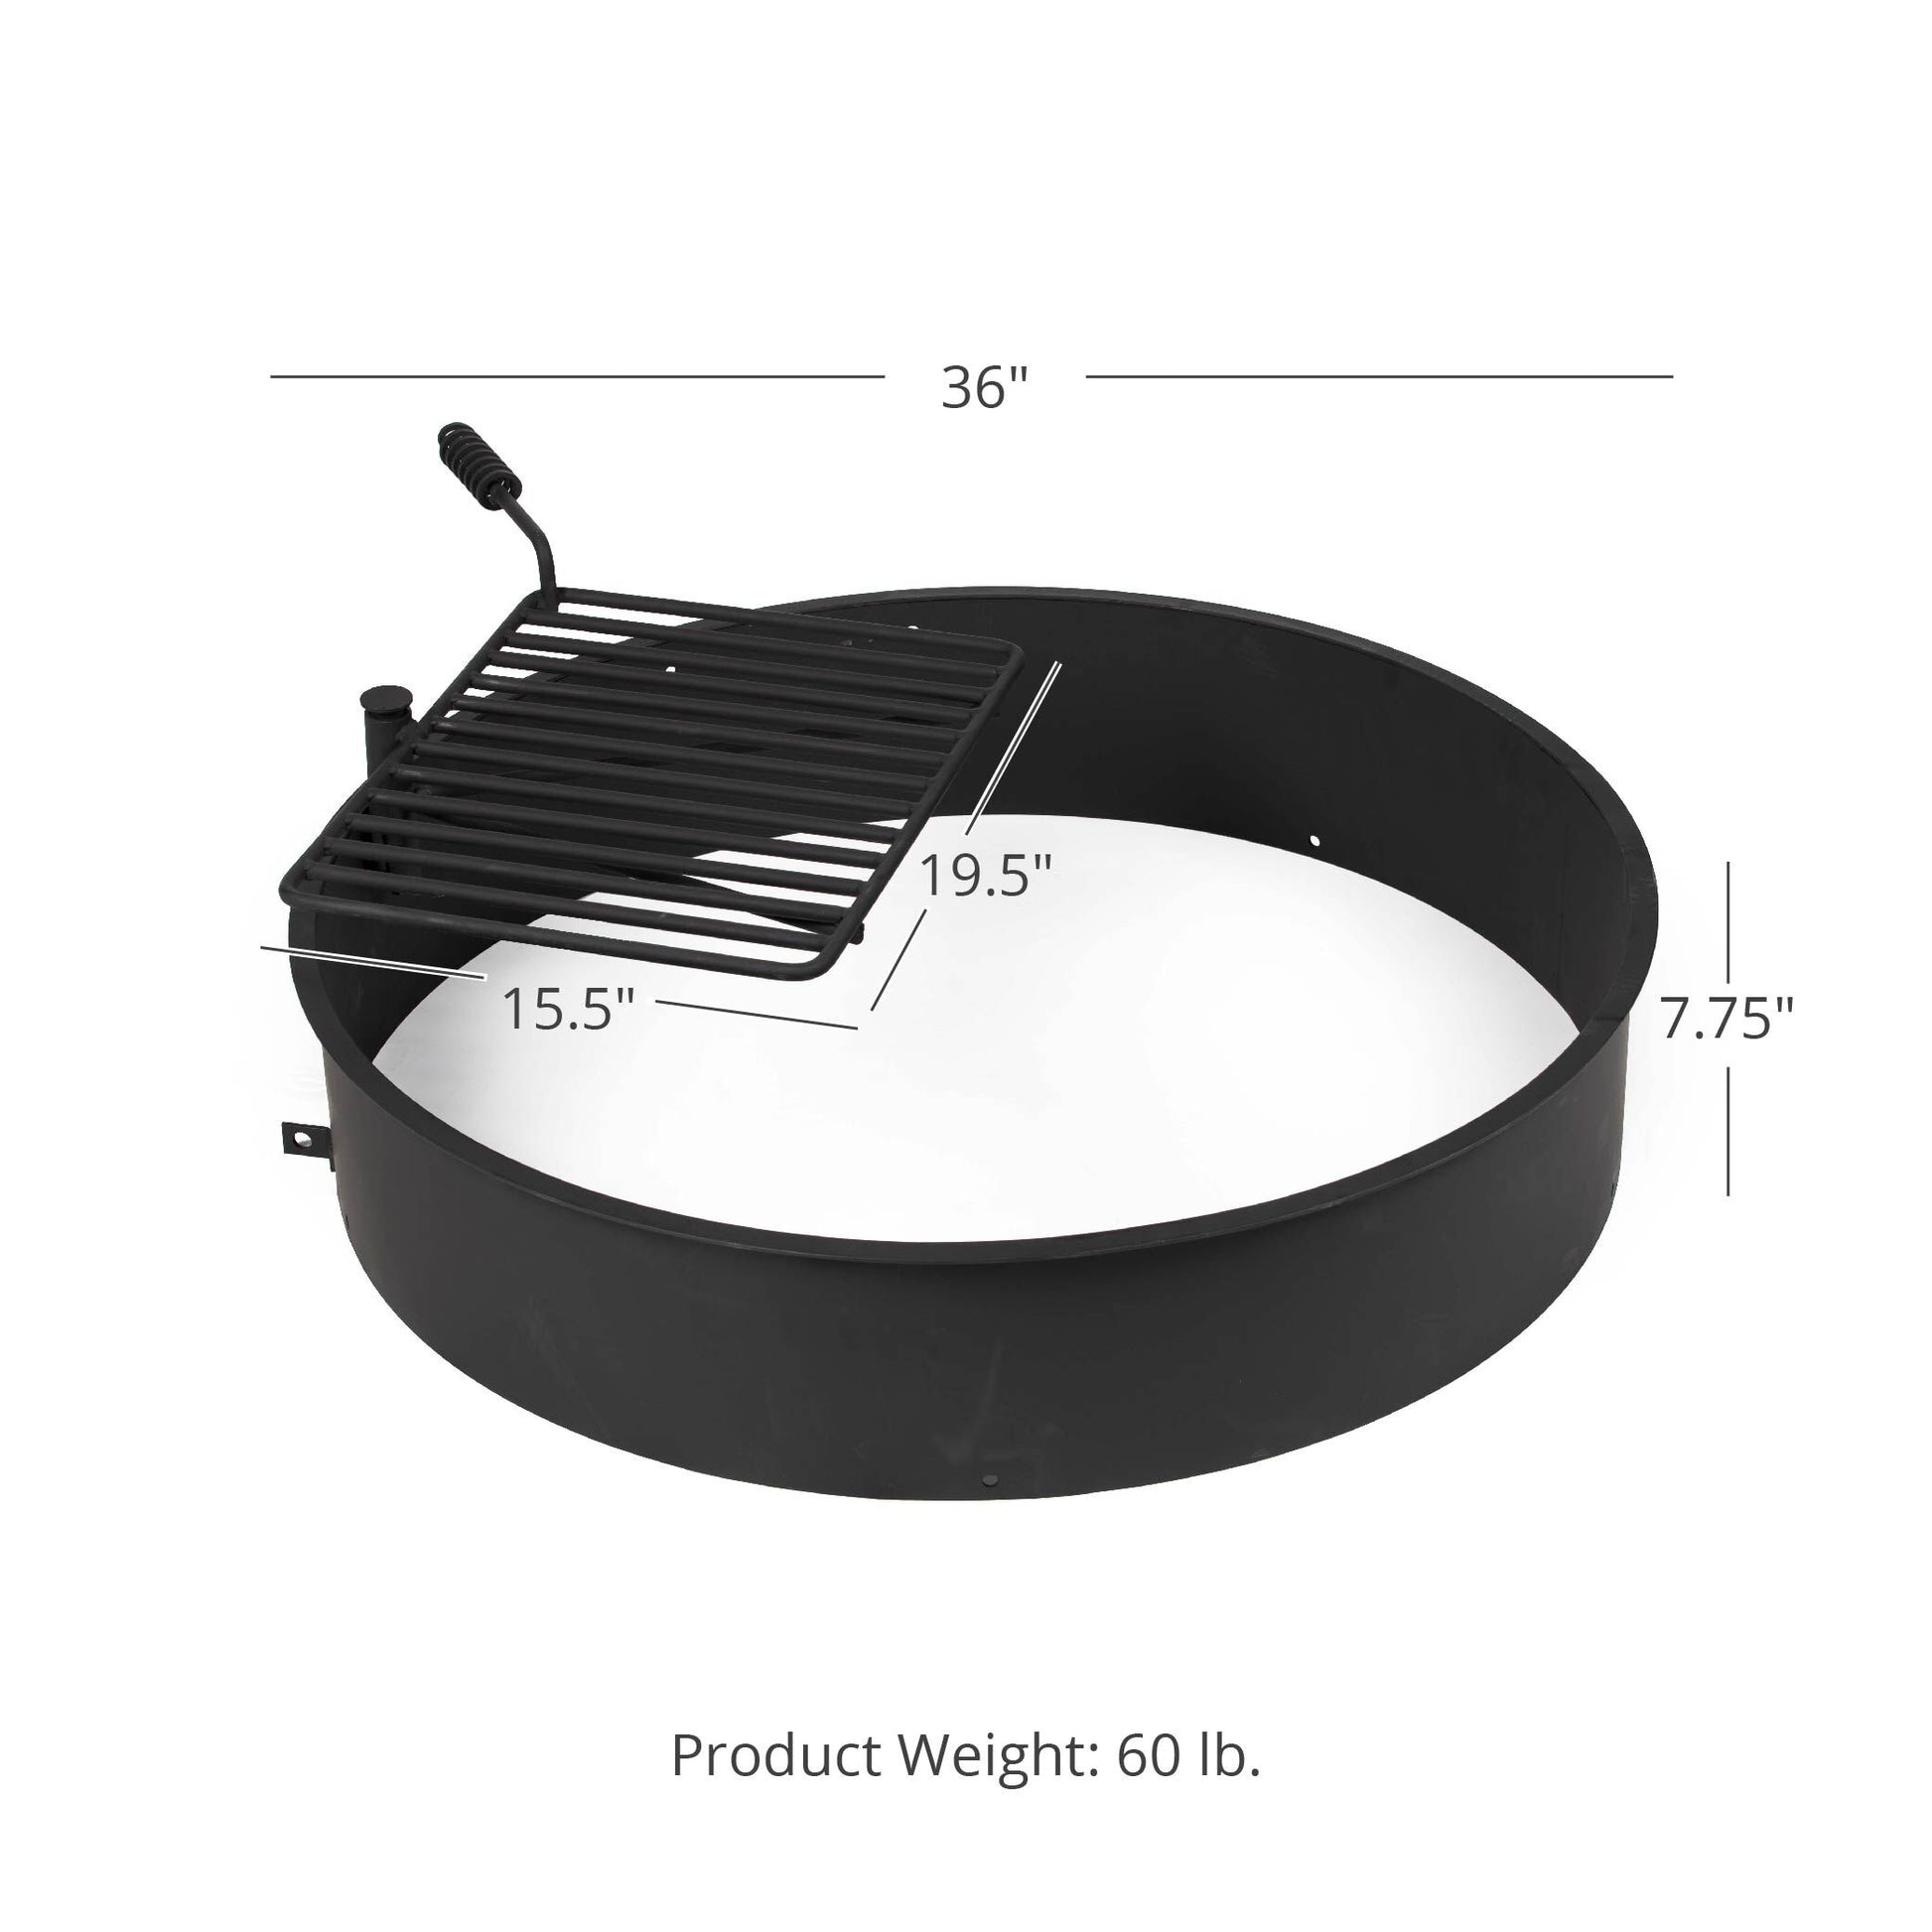 Steel Camp Fire Ring & Outdoor Cooking Grate - Fire Ring Size: 36" | 36"